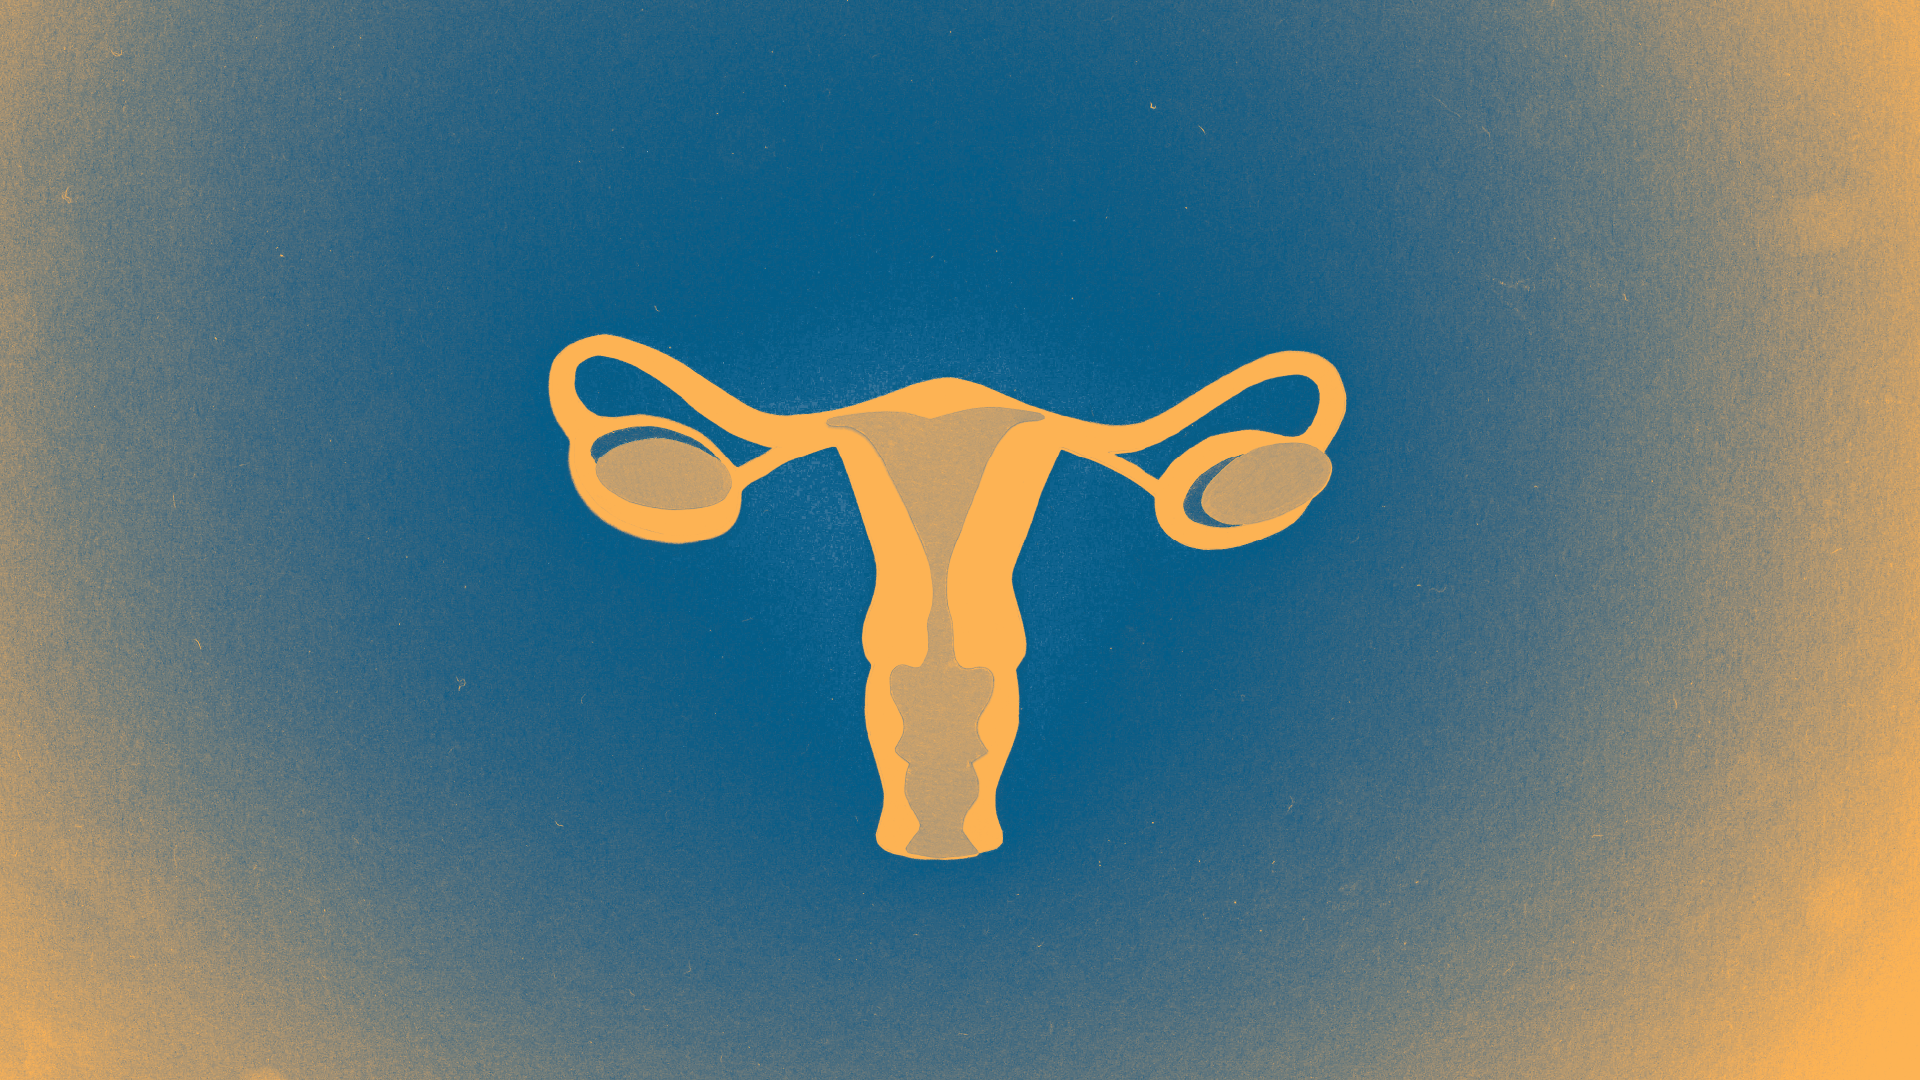 Potential Texas ordinance drives conversation about abortion laws on Reddit